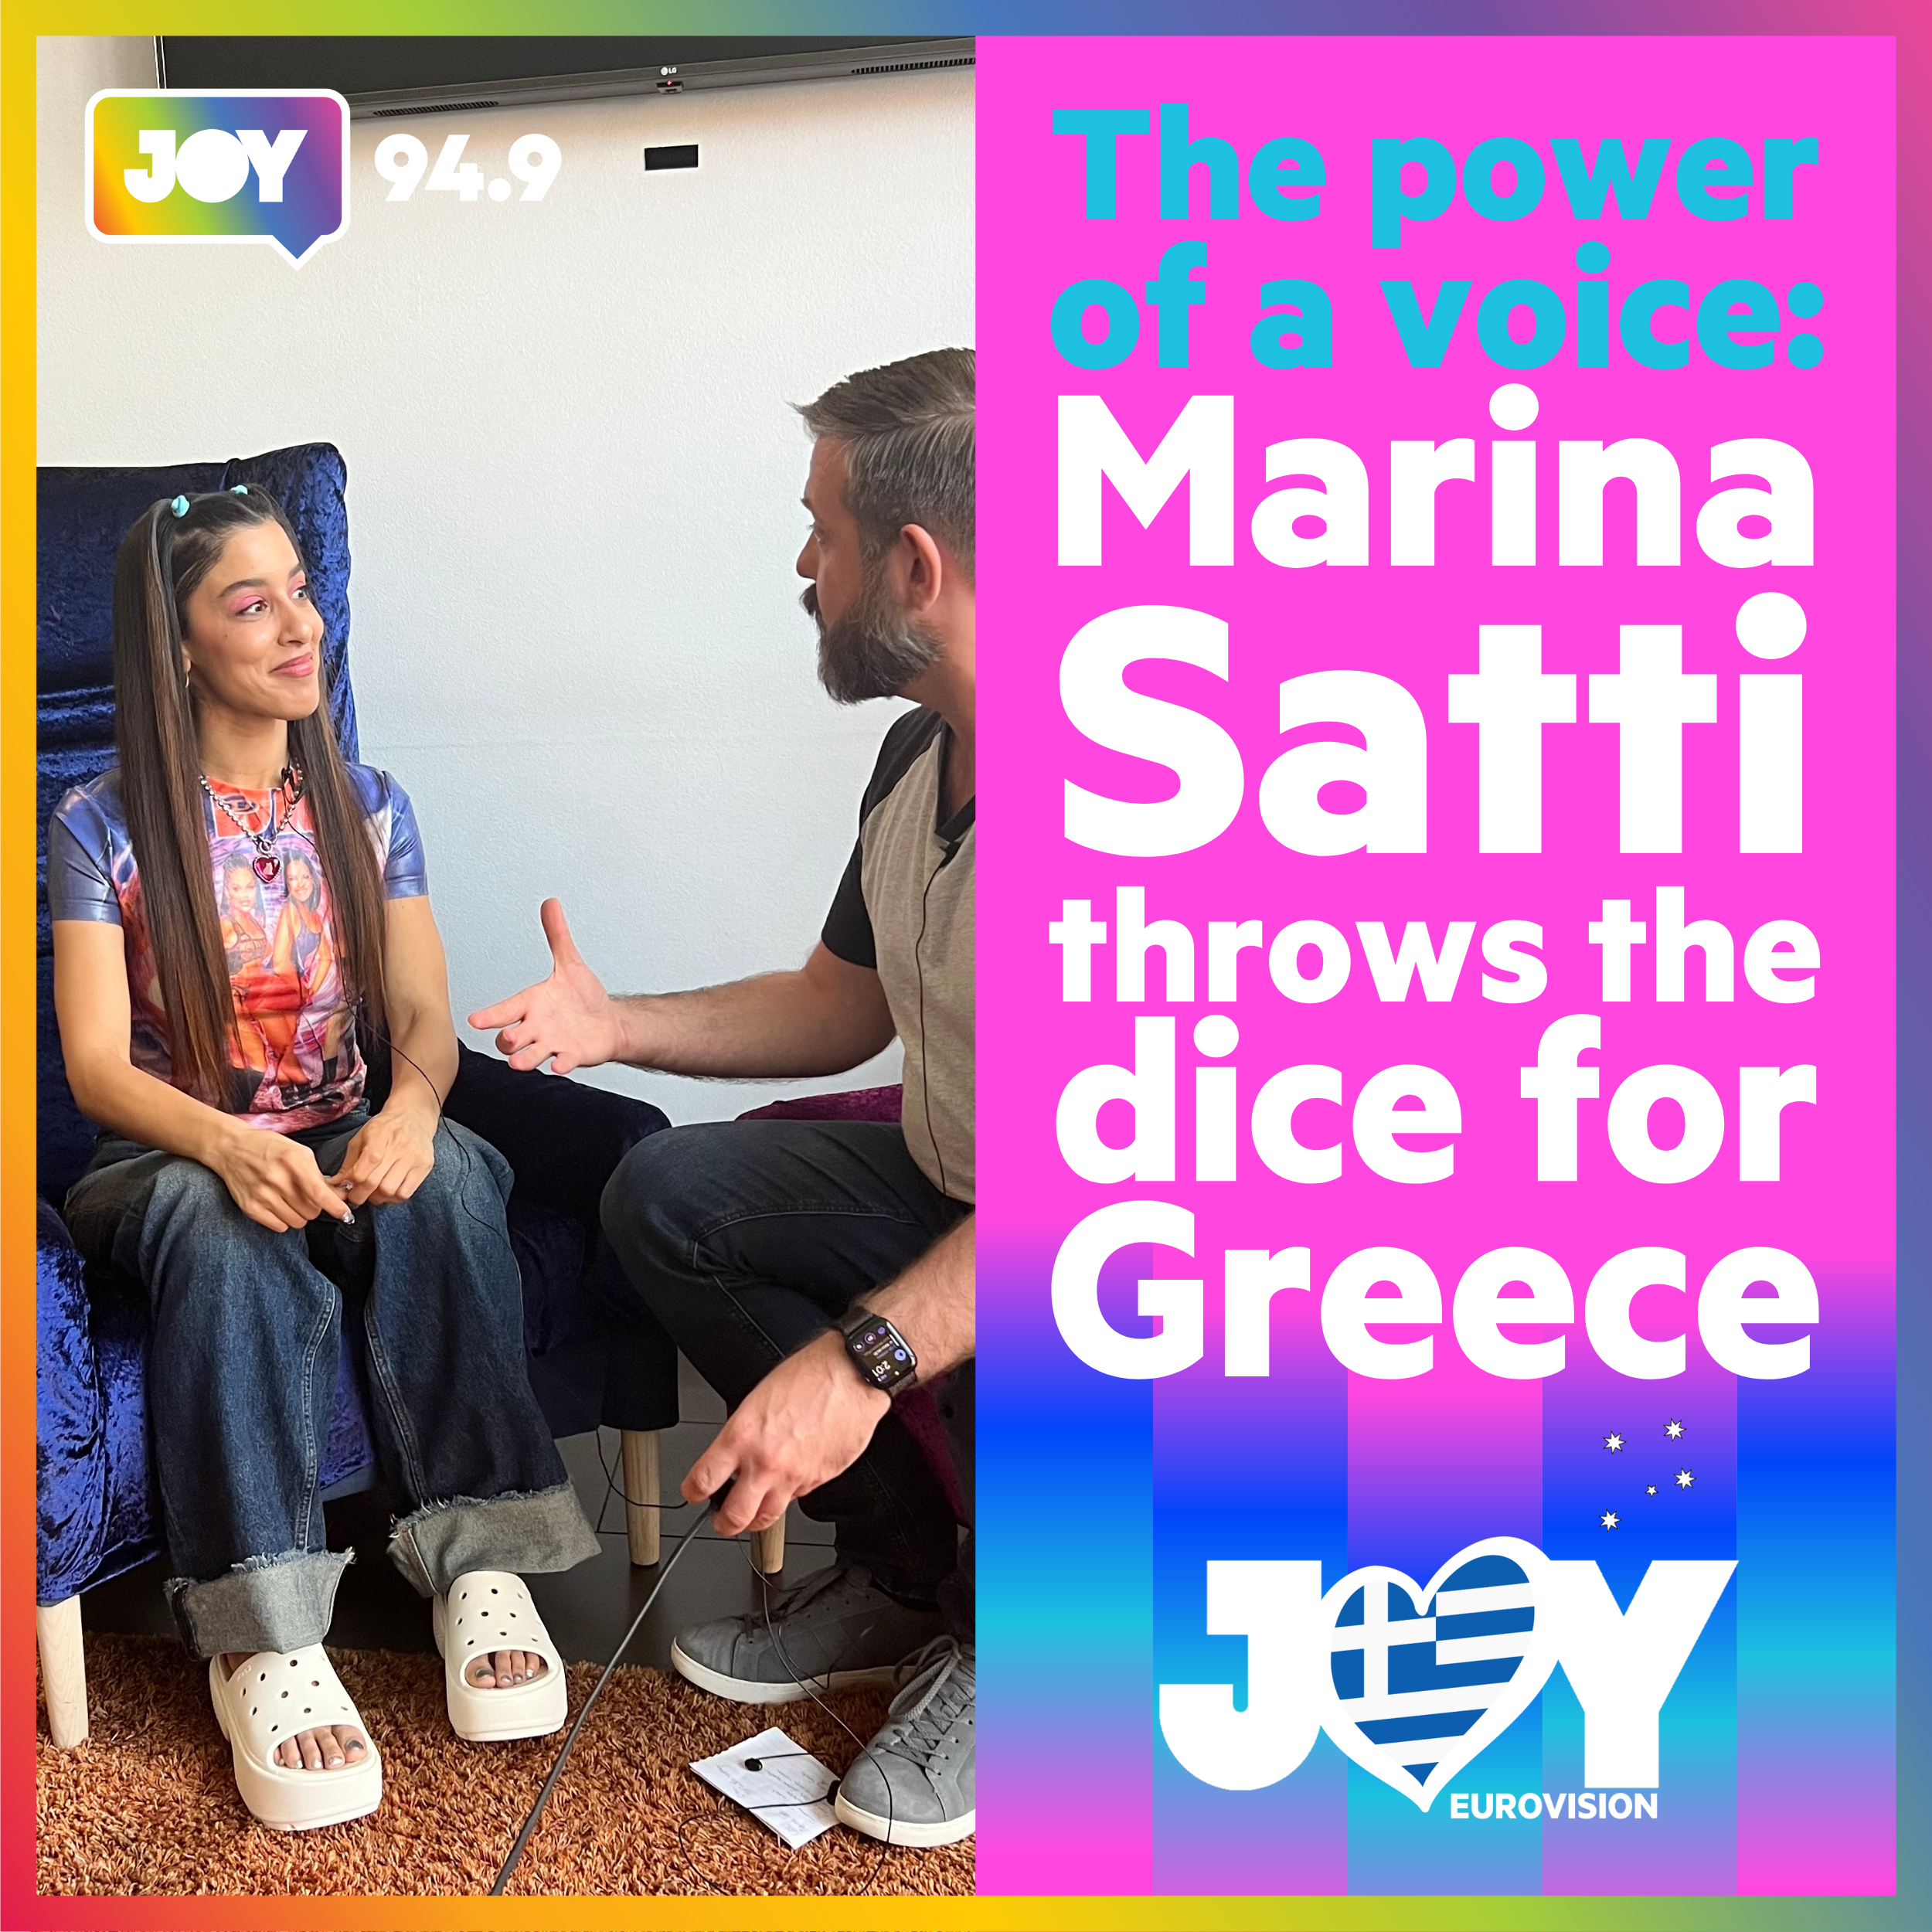 🇬🇷 The power of a voice: Marina Satti throws the dice for Greece